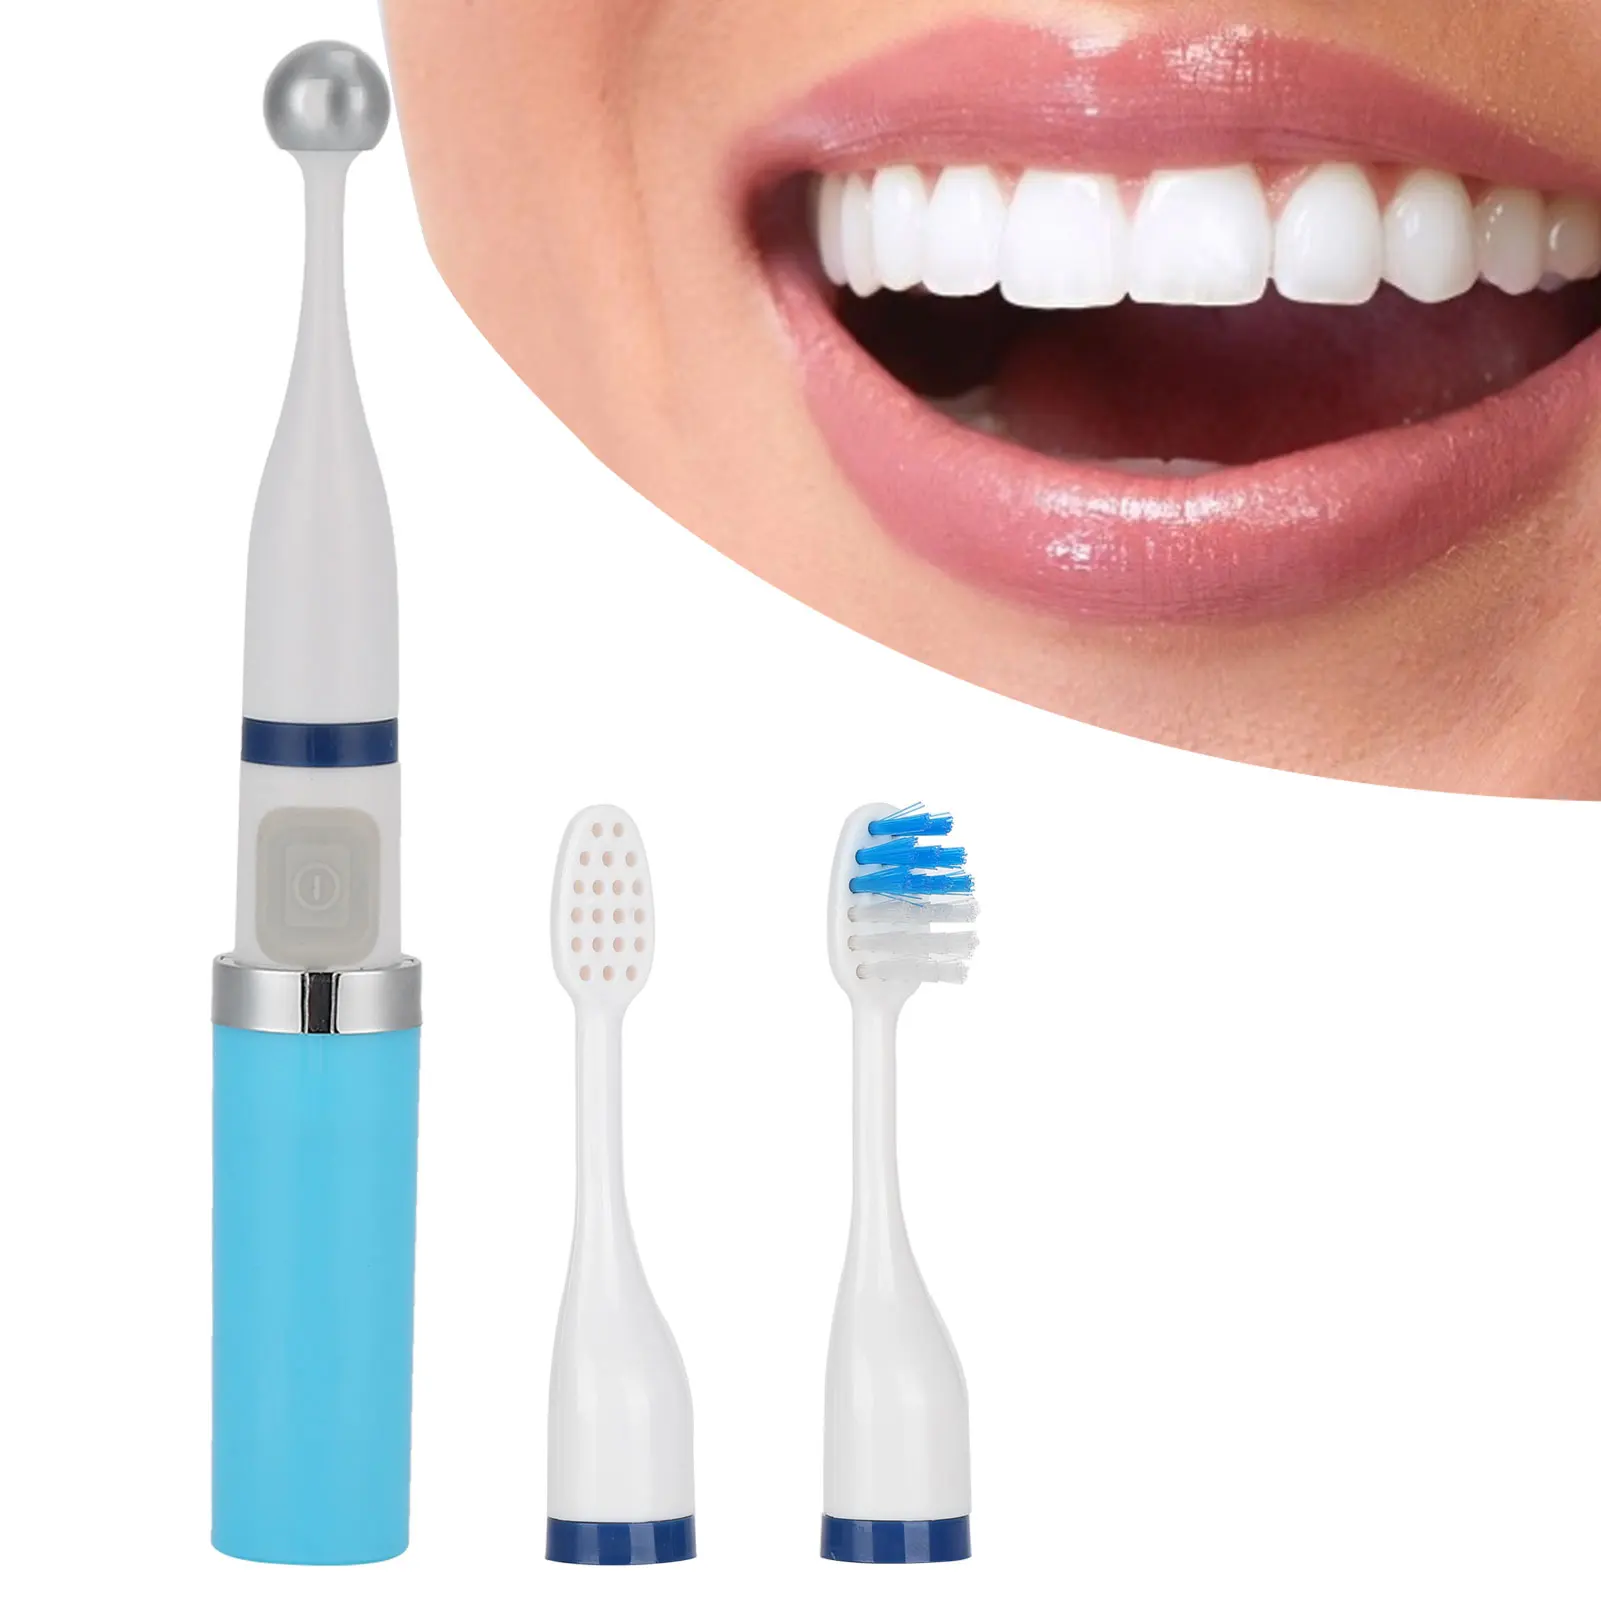 Three Heads Electric Tongue Muscle Training Recovery Device Tongue Mouth Muscle Training Tools Massage Oral Points Toothbrush 6 pcs 6 point hex socket h4 hex shank driver 6 point hex socket 2 5 3 3 5 4 4 5 5mm h4 nut driver 6 in 1 6 points hand tools